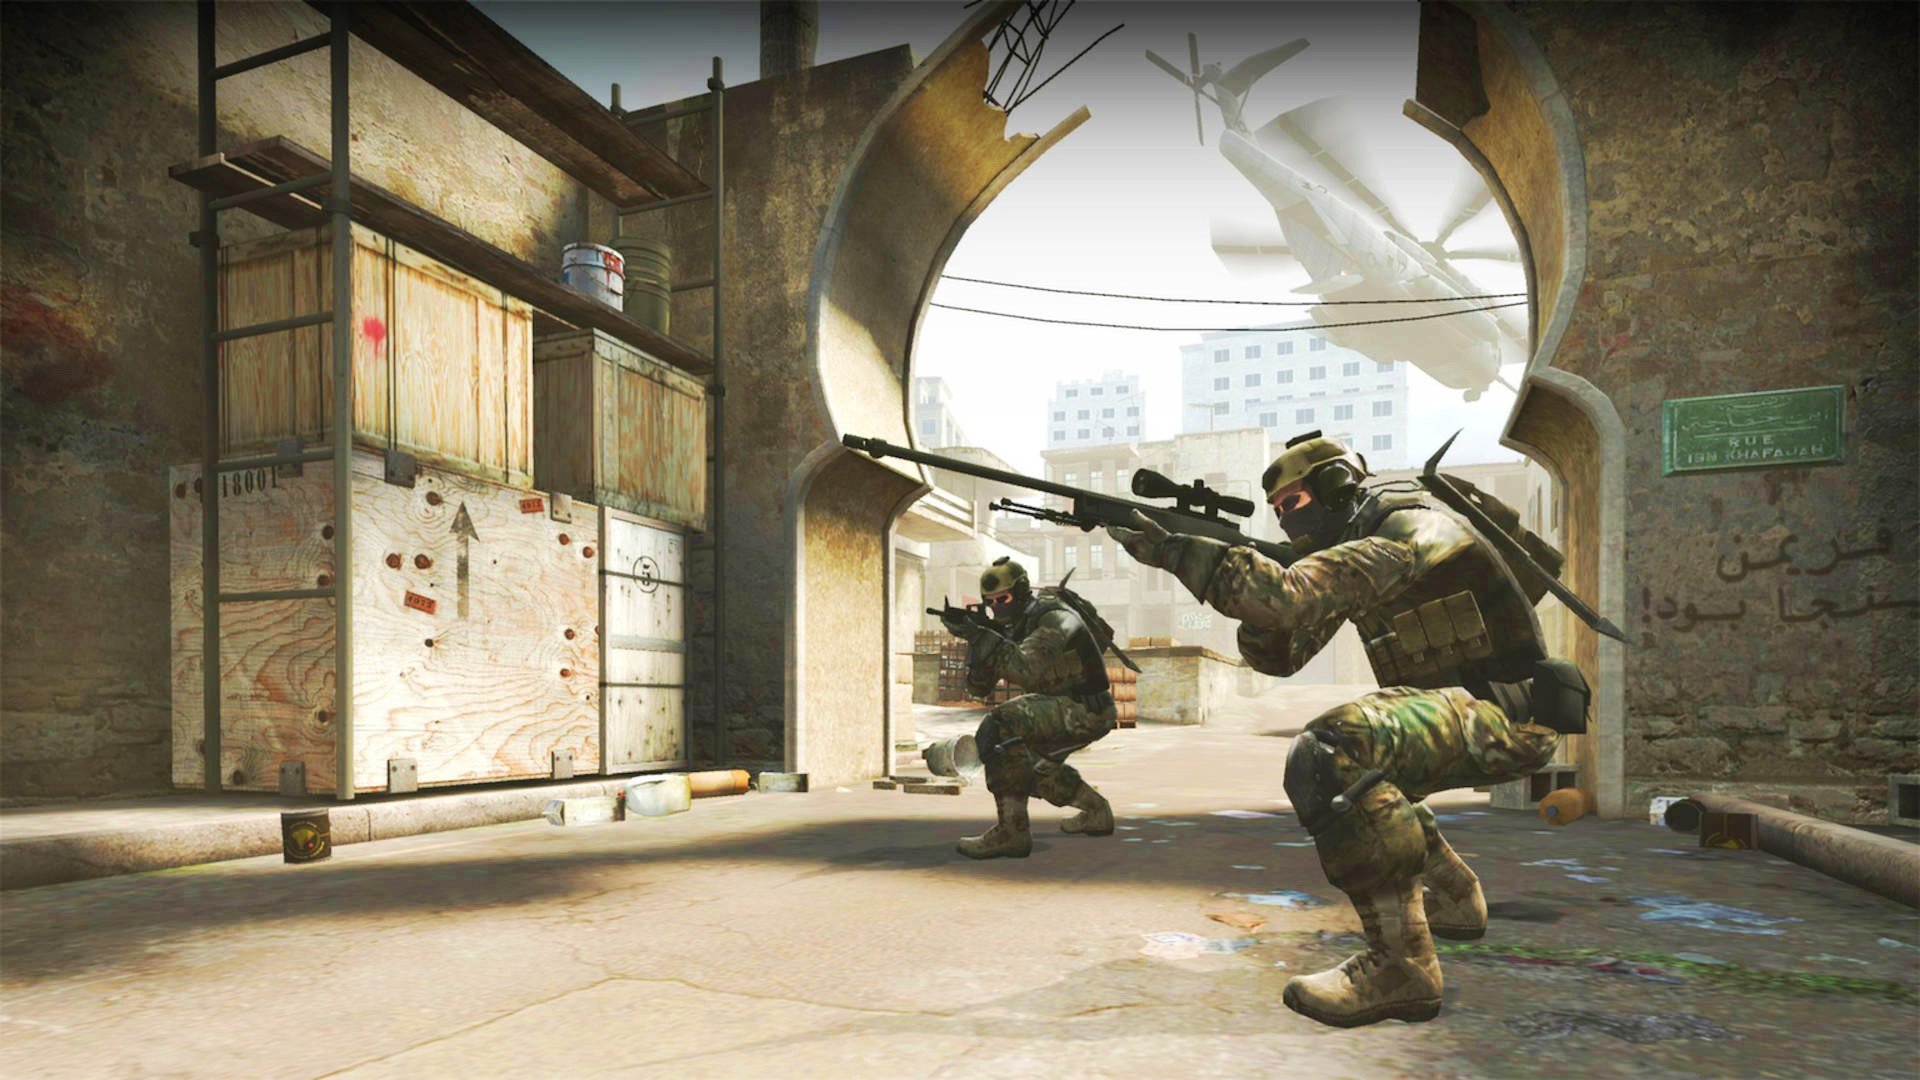 Report: Source 2 version of CSGO set for release with Counter